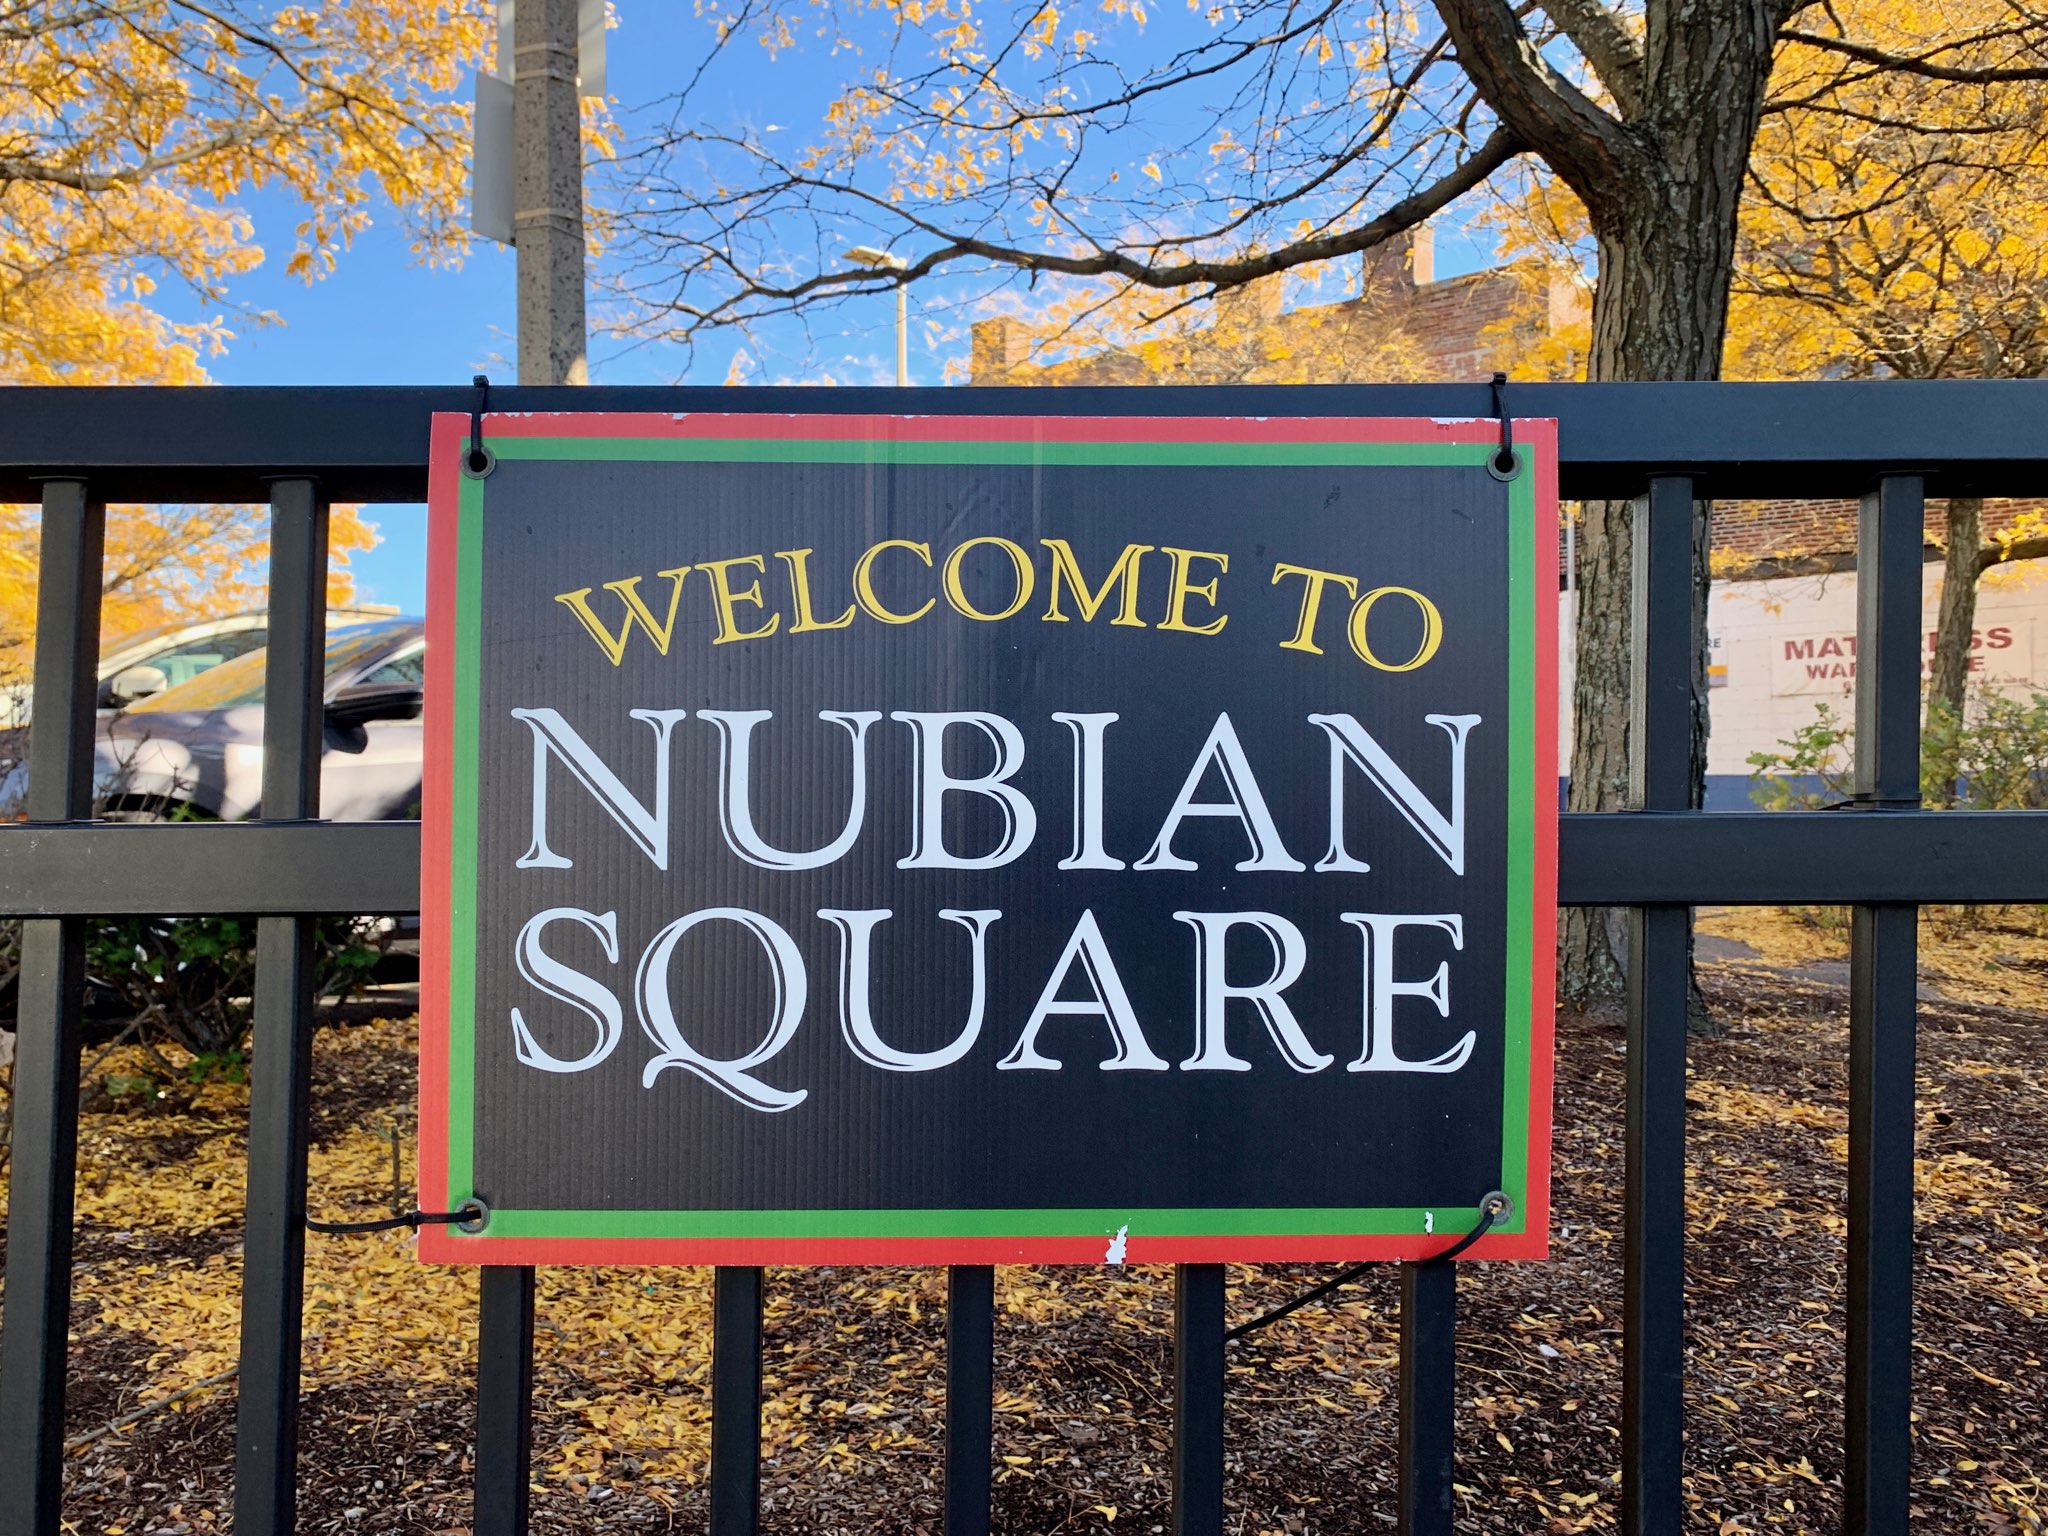 Signs already proclaim Dudley Square "Nubian Square." Photo by Jordan Erb.